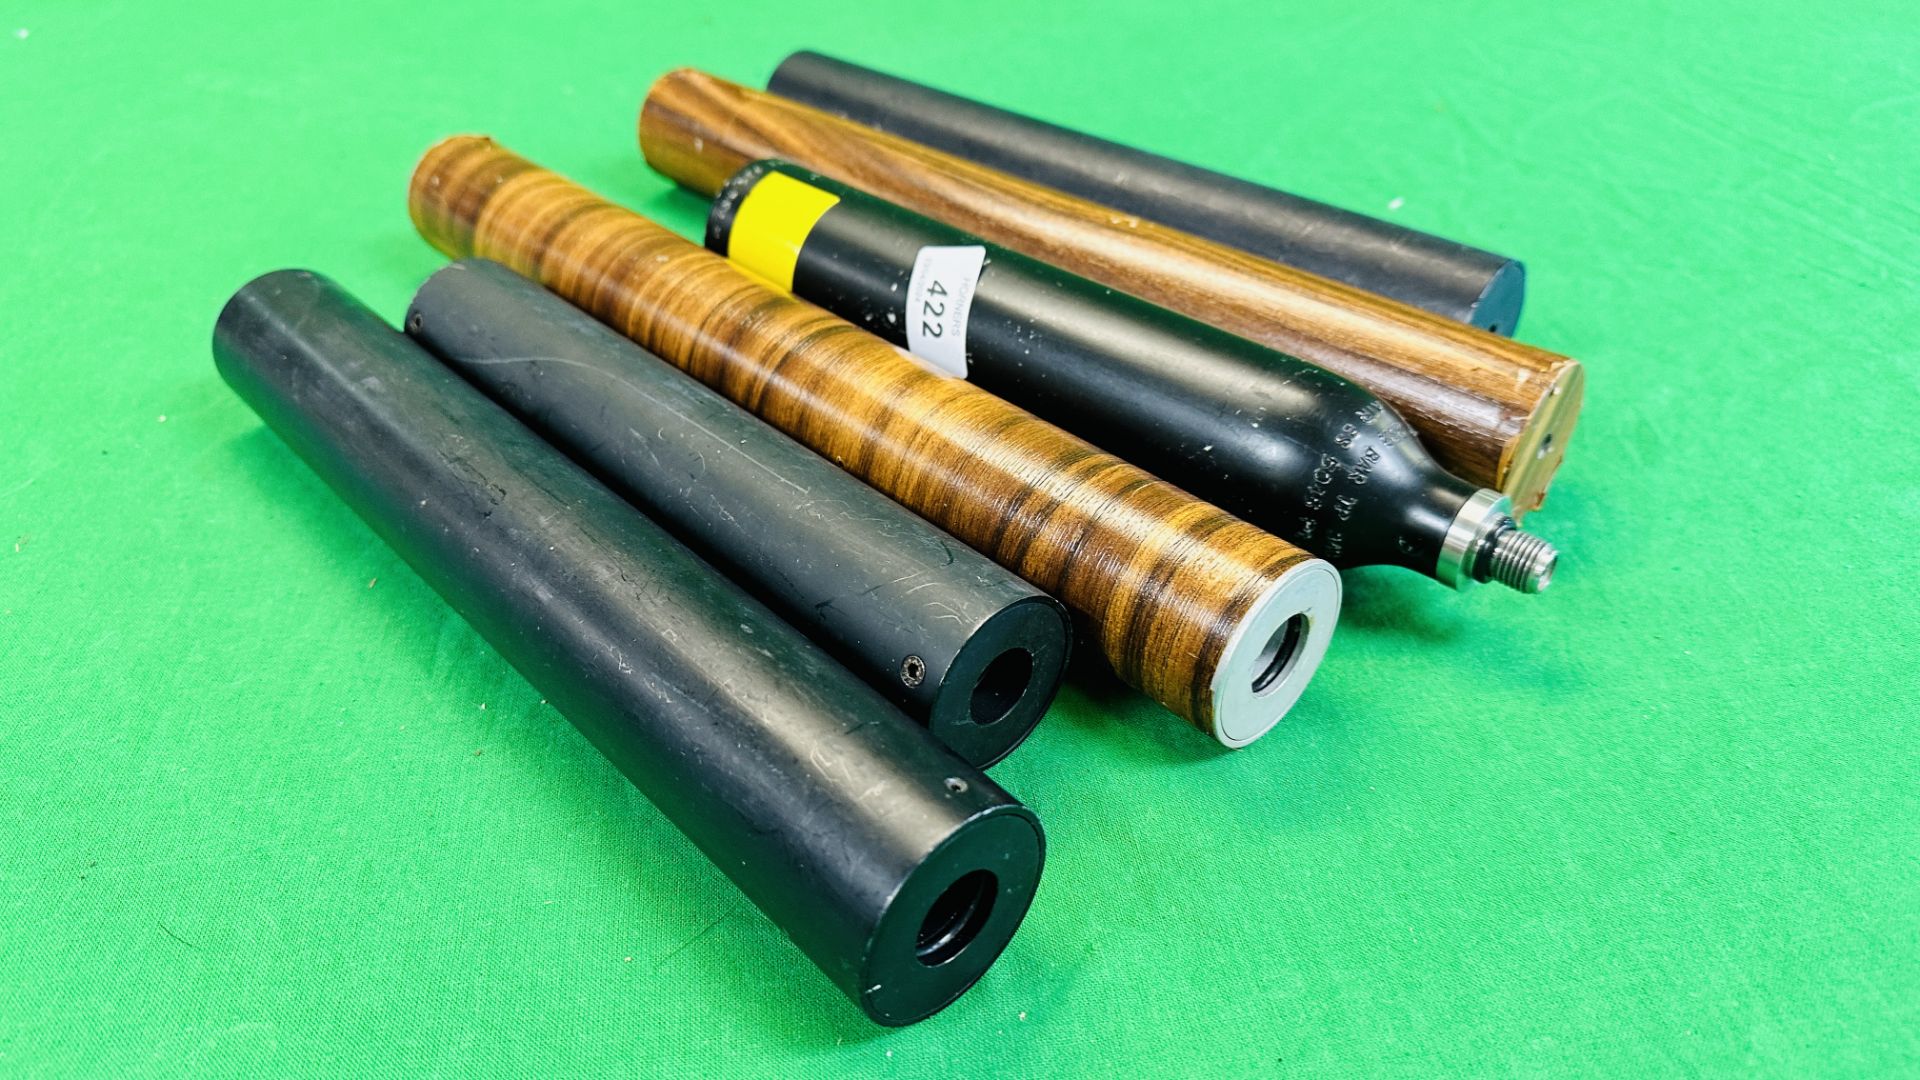 A PCP AIR CYLINDER BELIEVED TO FIT A RAPID 7 + FIVE VARIOUS AIR RIFLES SILENCERS TO INCLUDE .